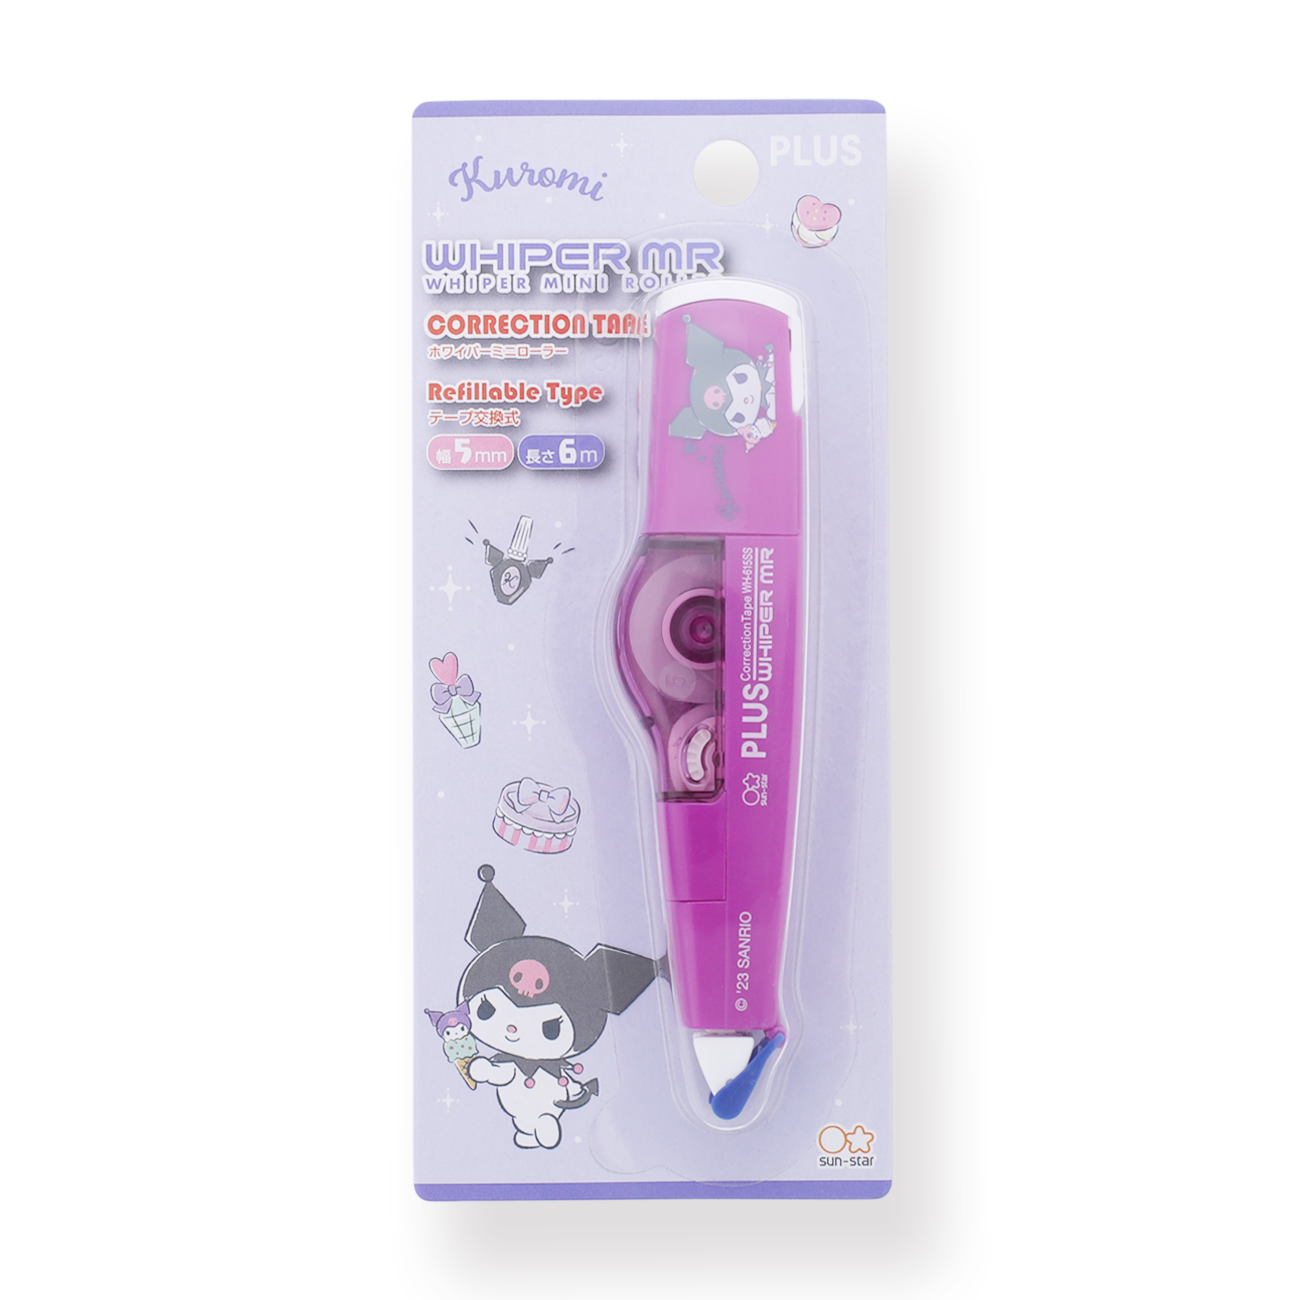 Plus Whiper MR Limited Edition Correction Tape - Kuromi - Stationery Pal